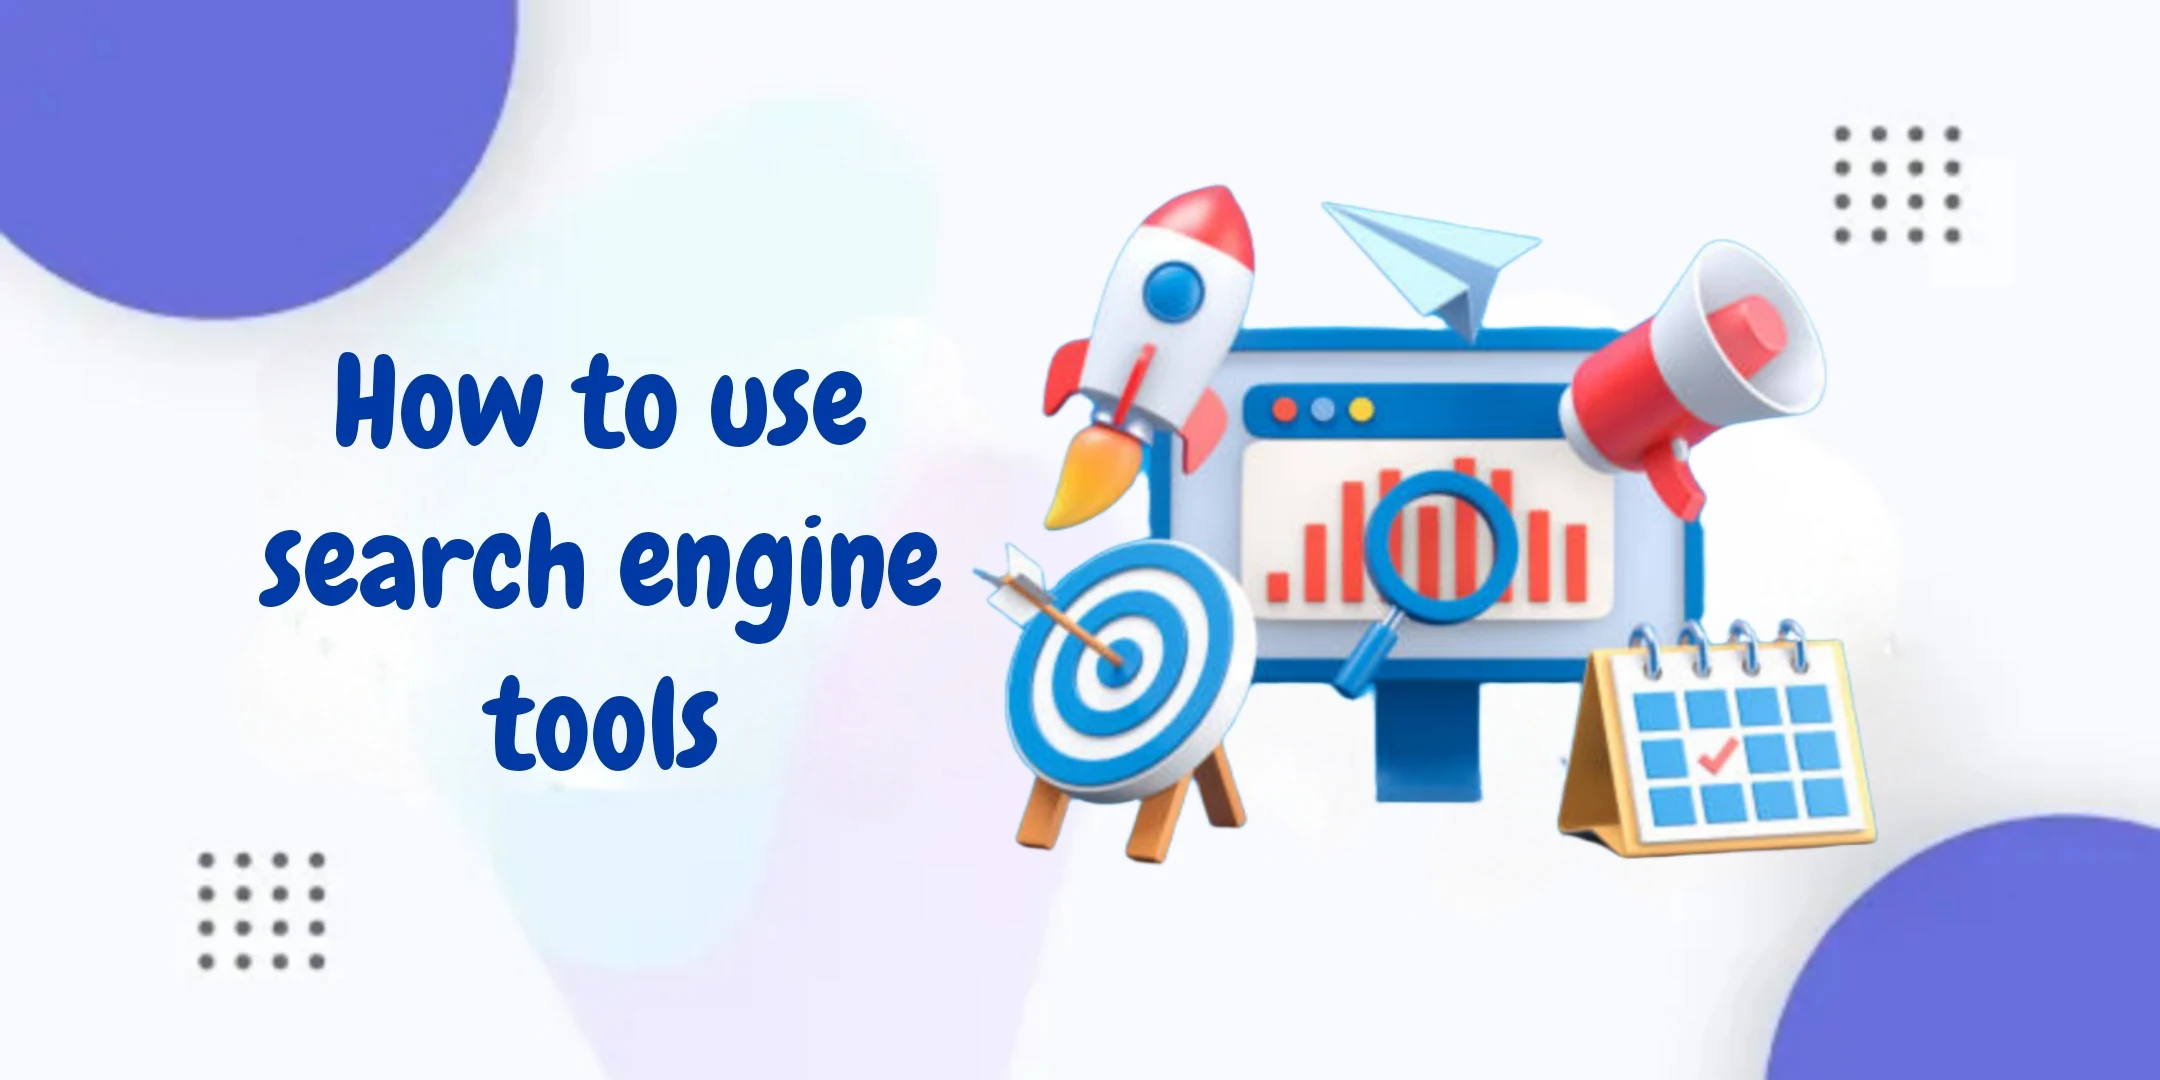 How to use search engine tools : searching tools and techniques